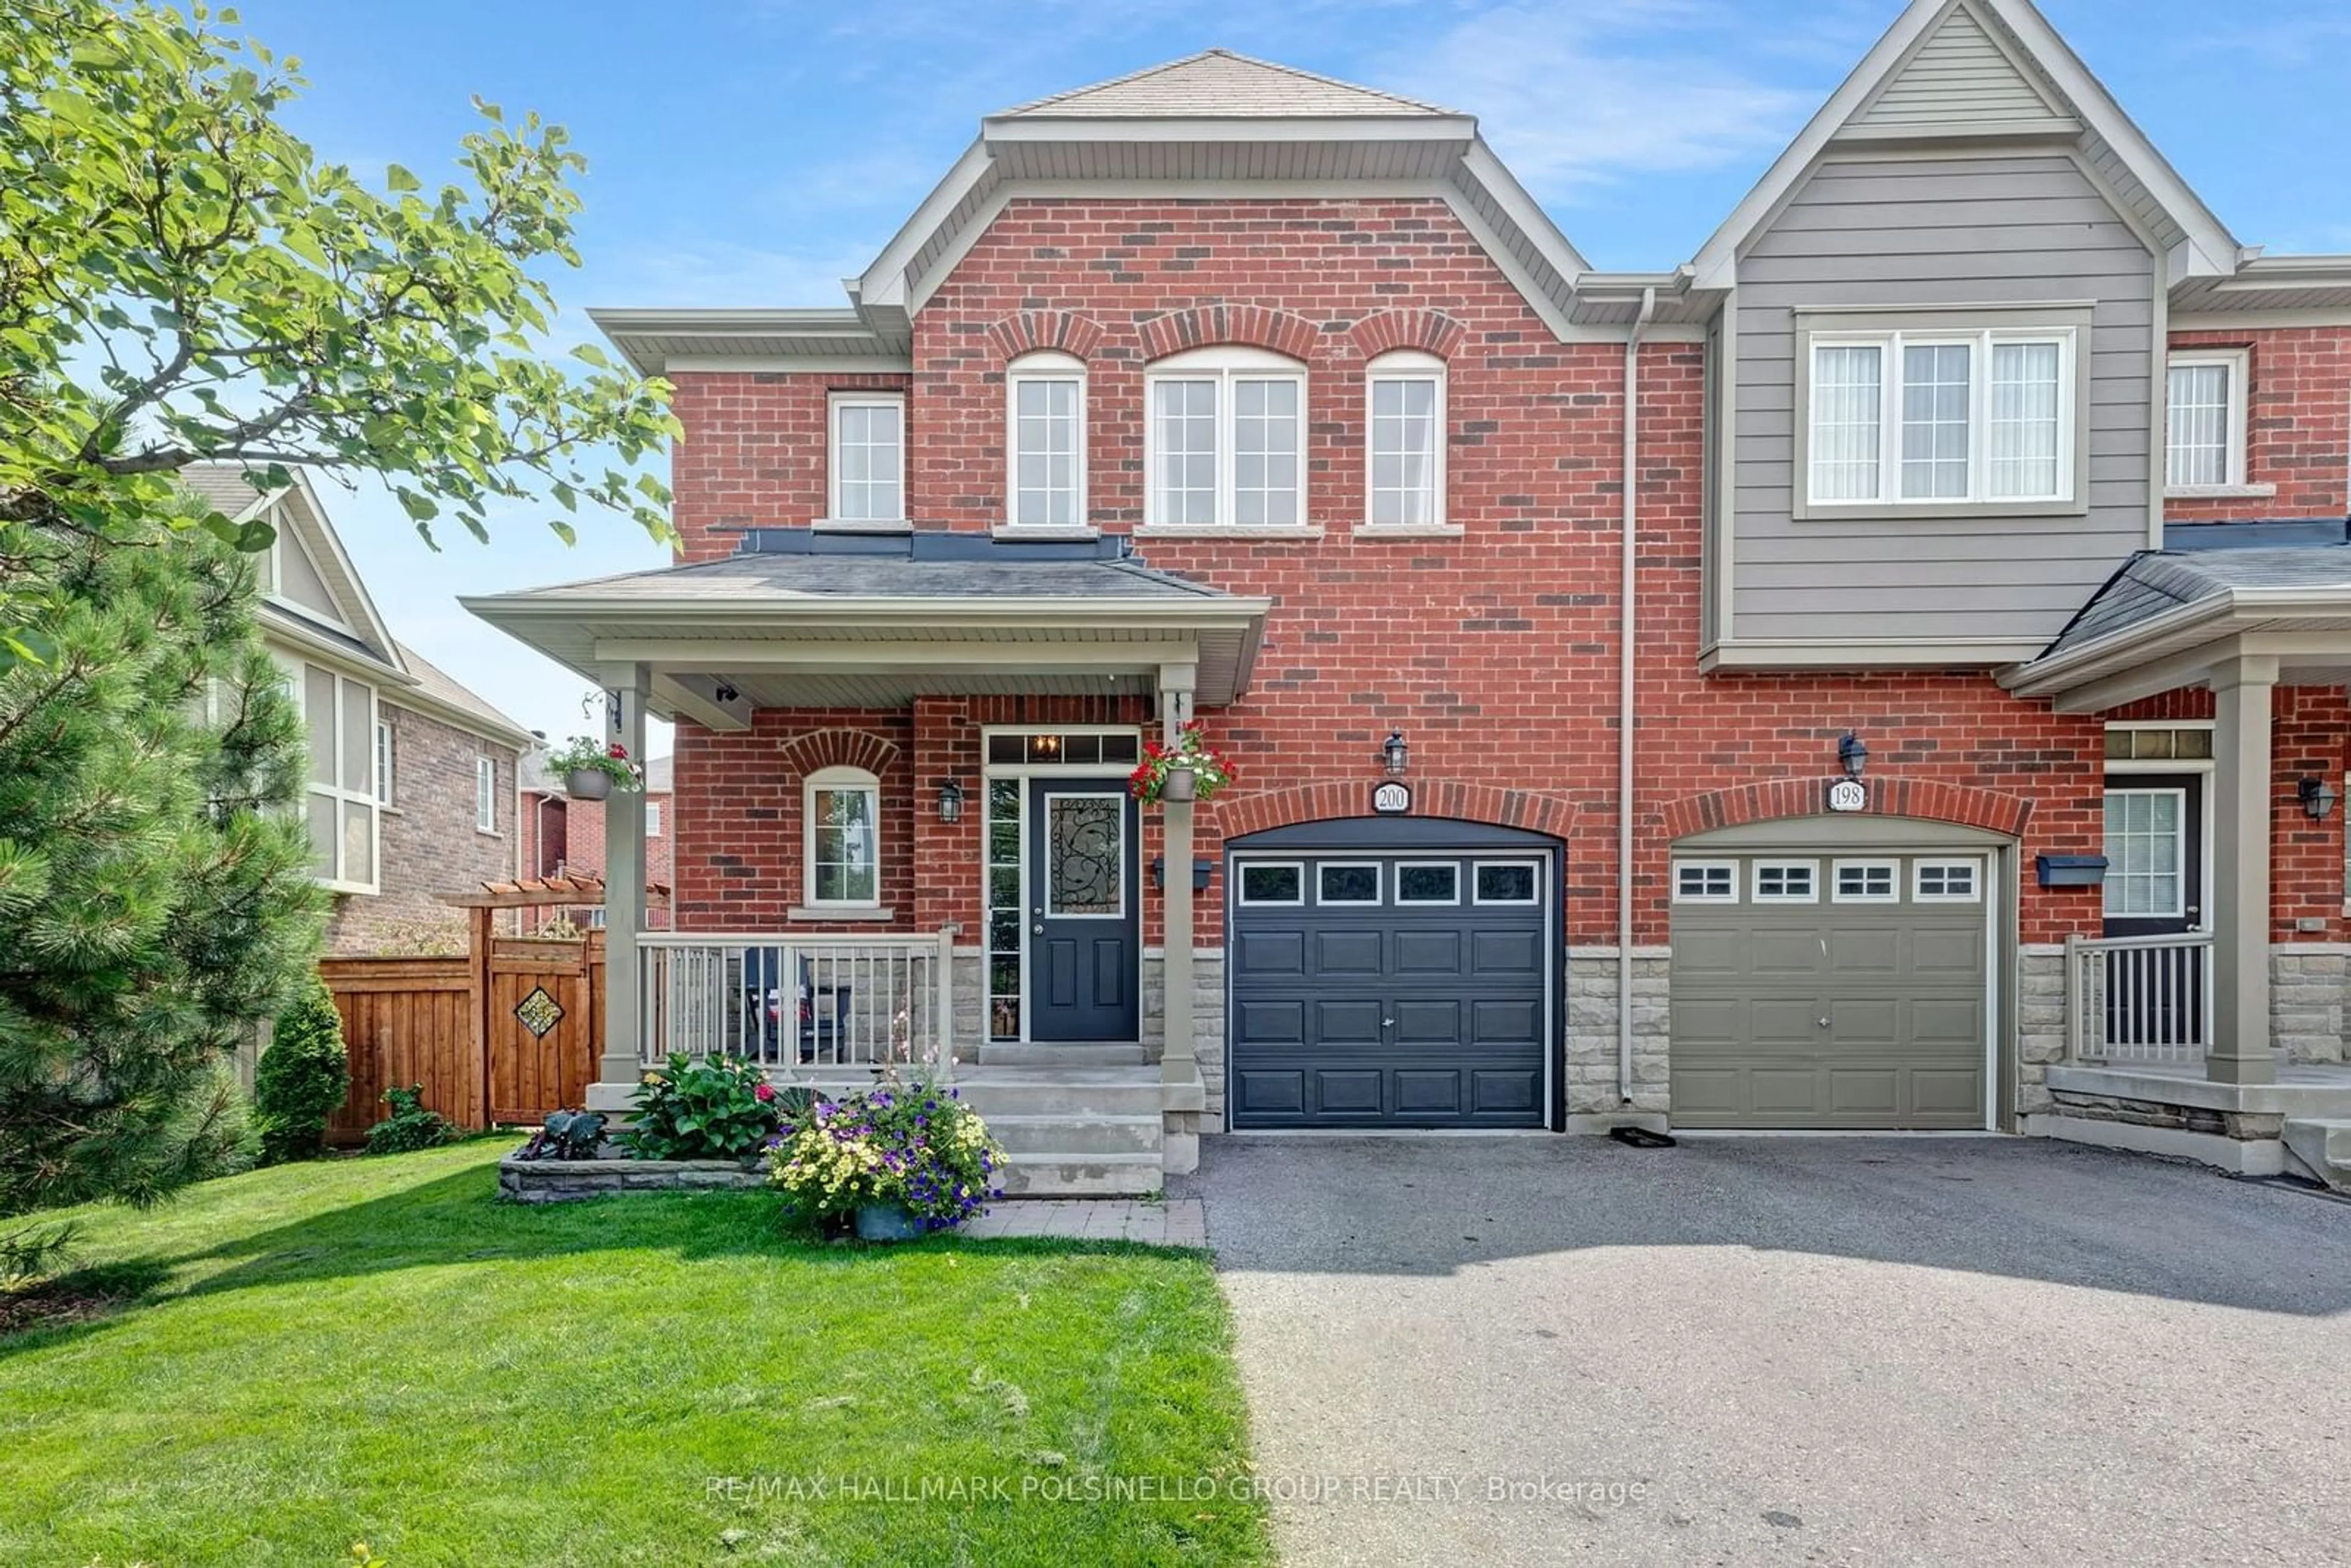 Home with brick exterior material for 200 Lewis Honey Dr, Aurora Ontario L4G 0R8